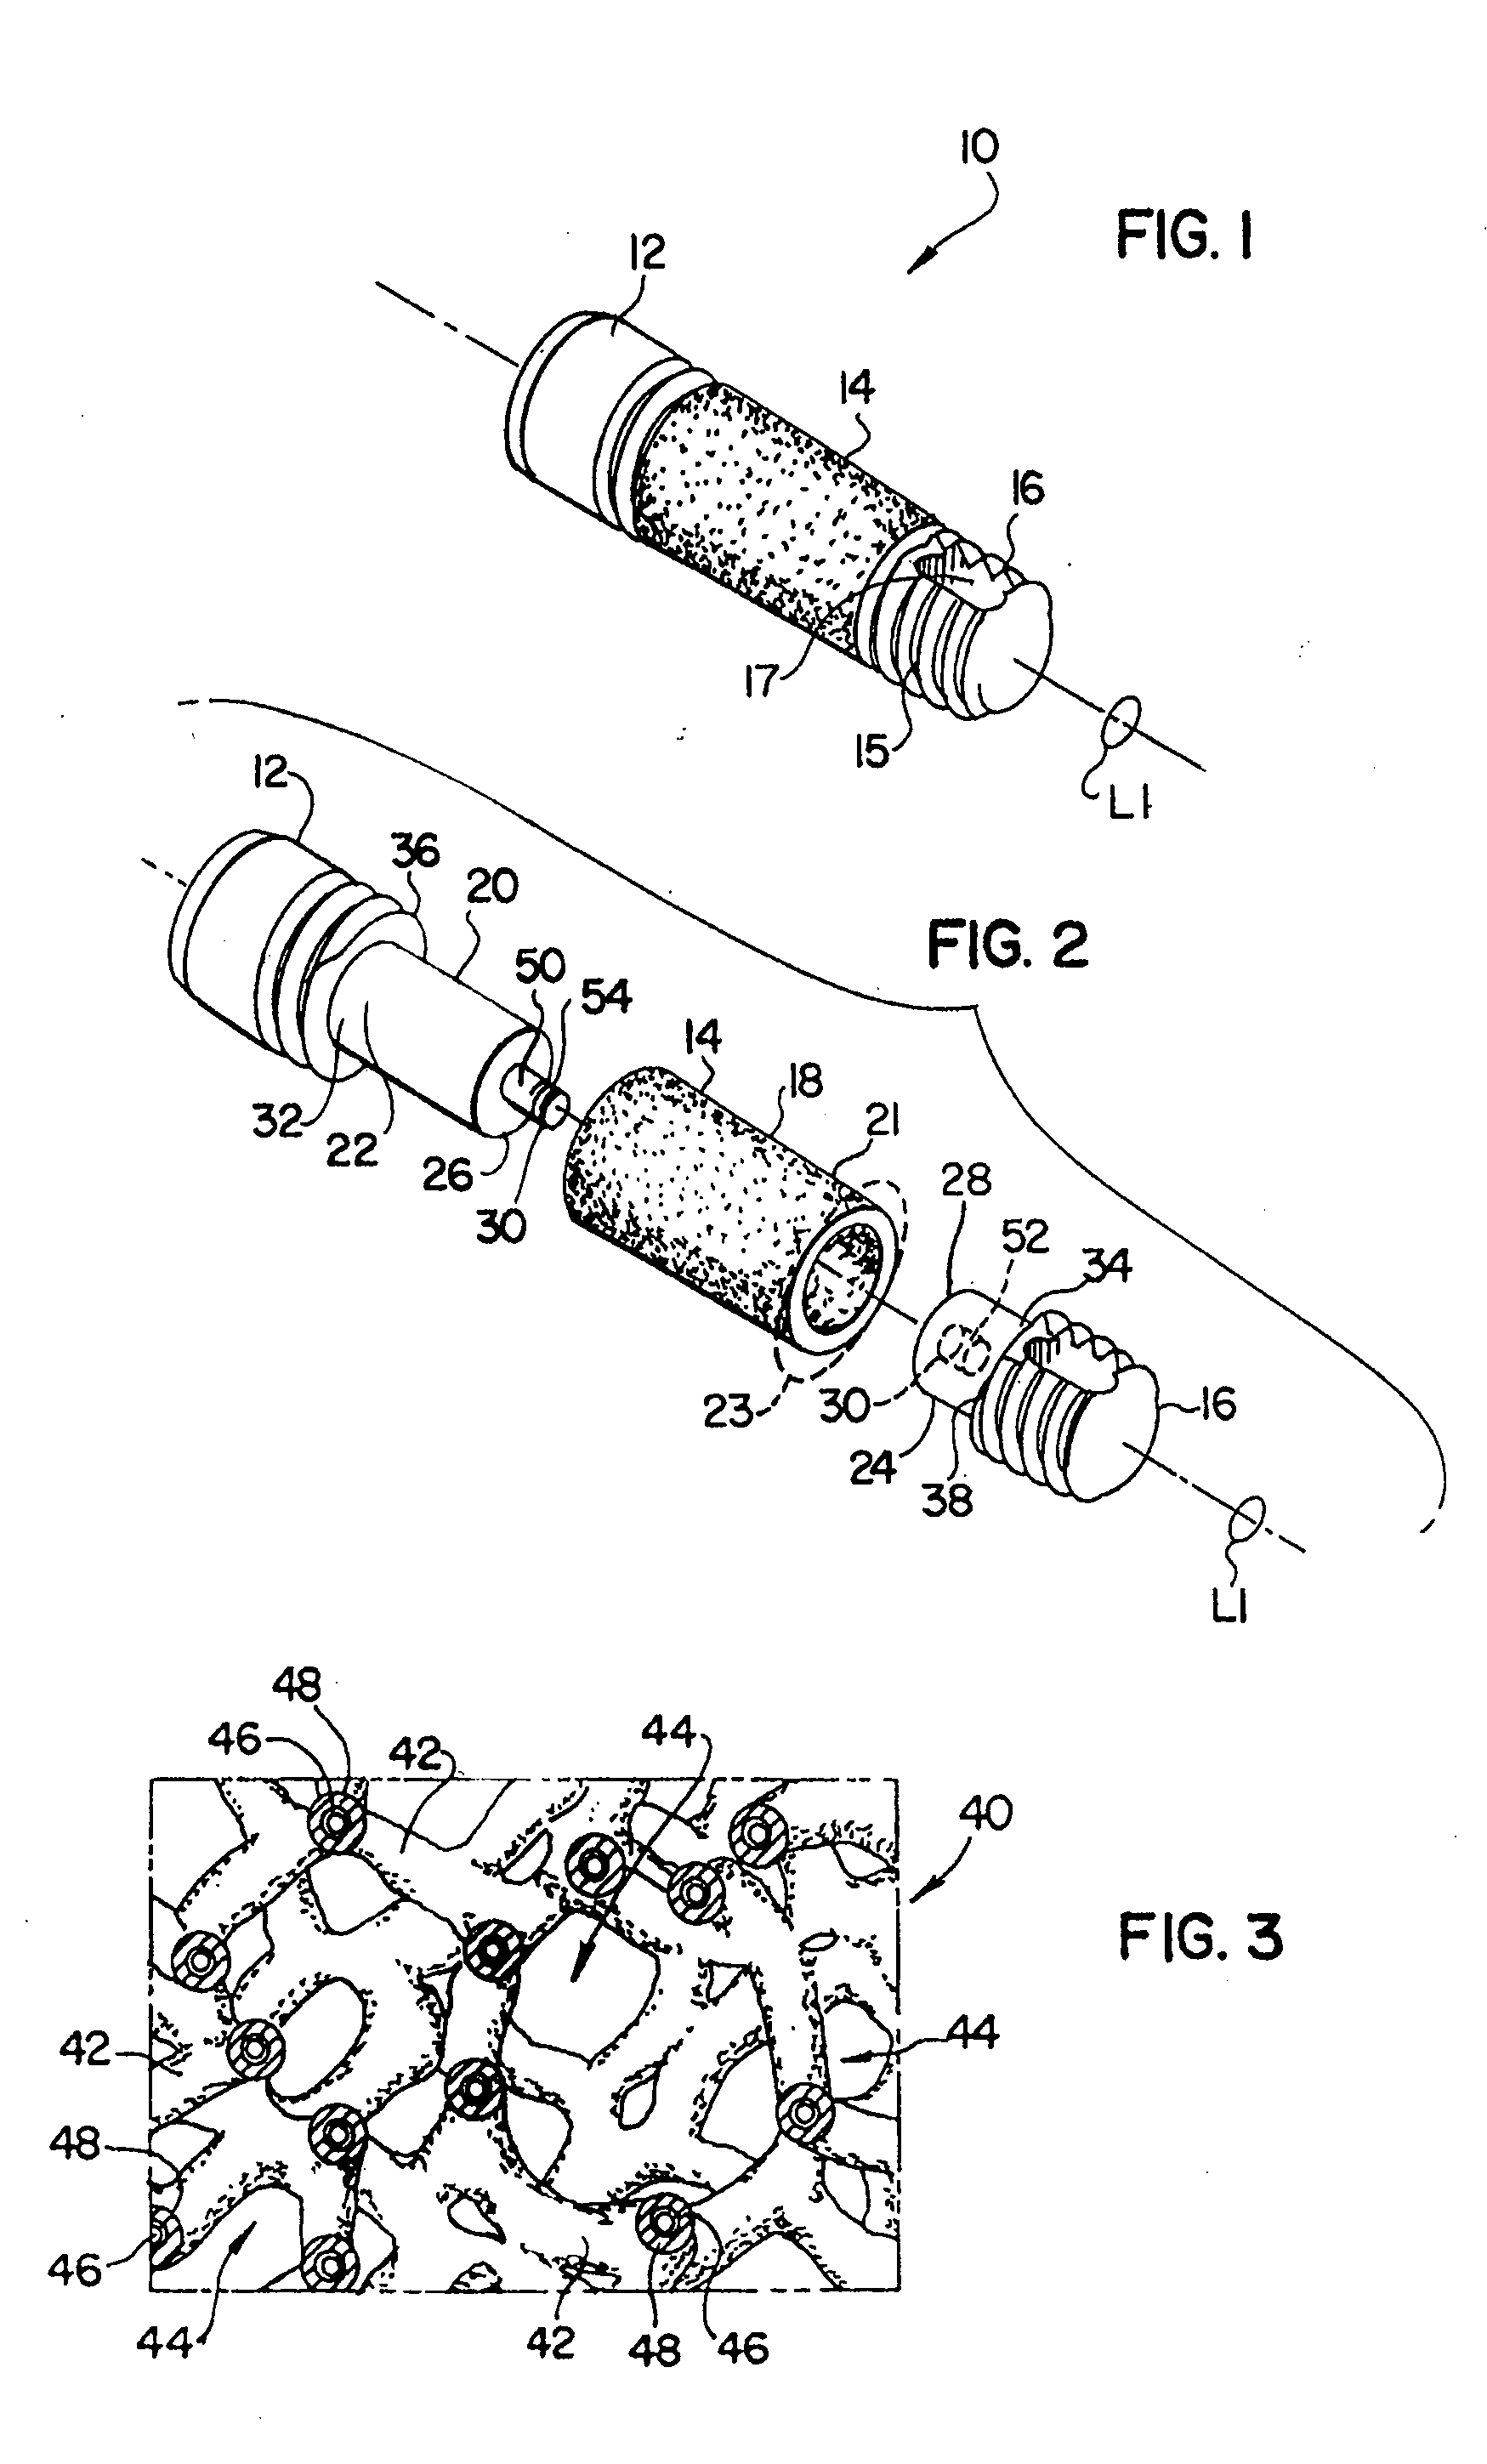 Modular implant with secured porous portion